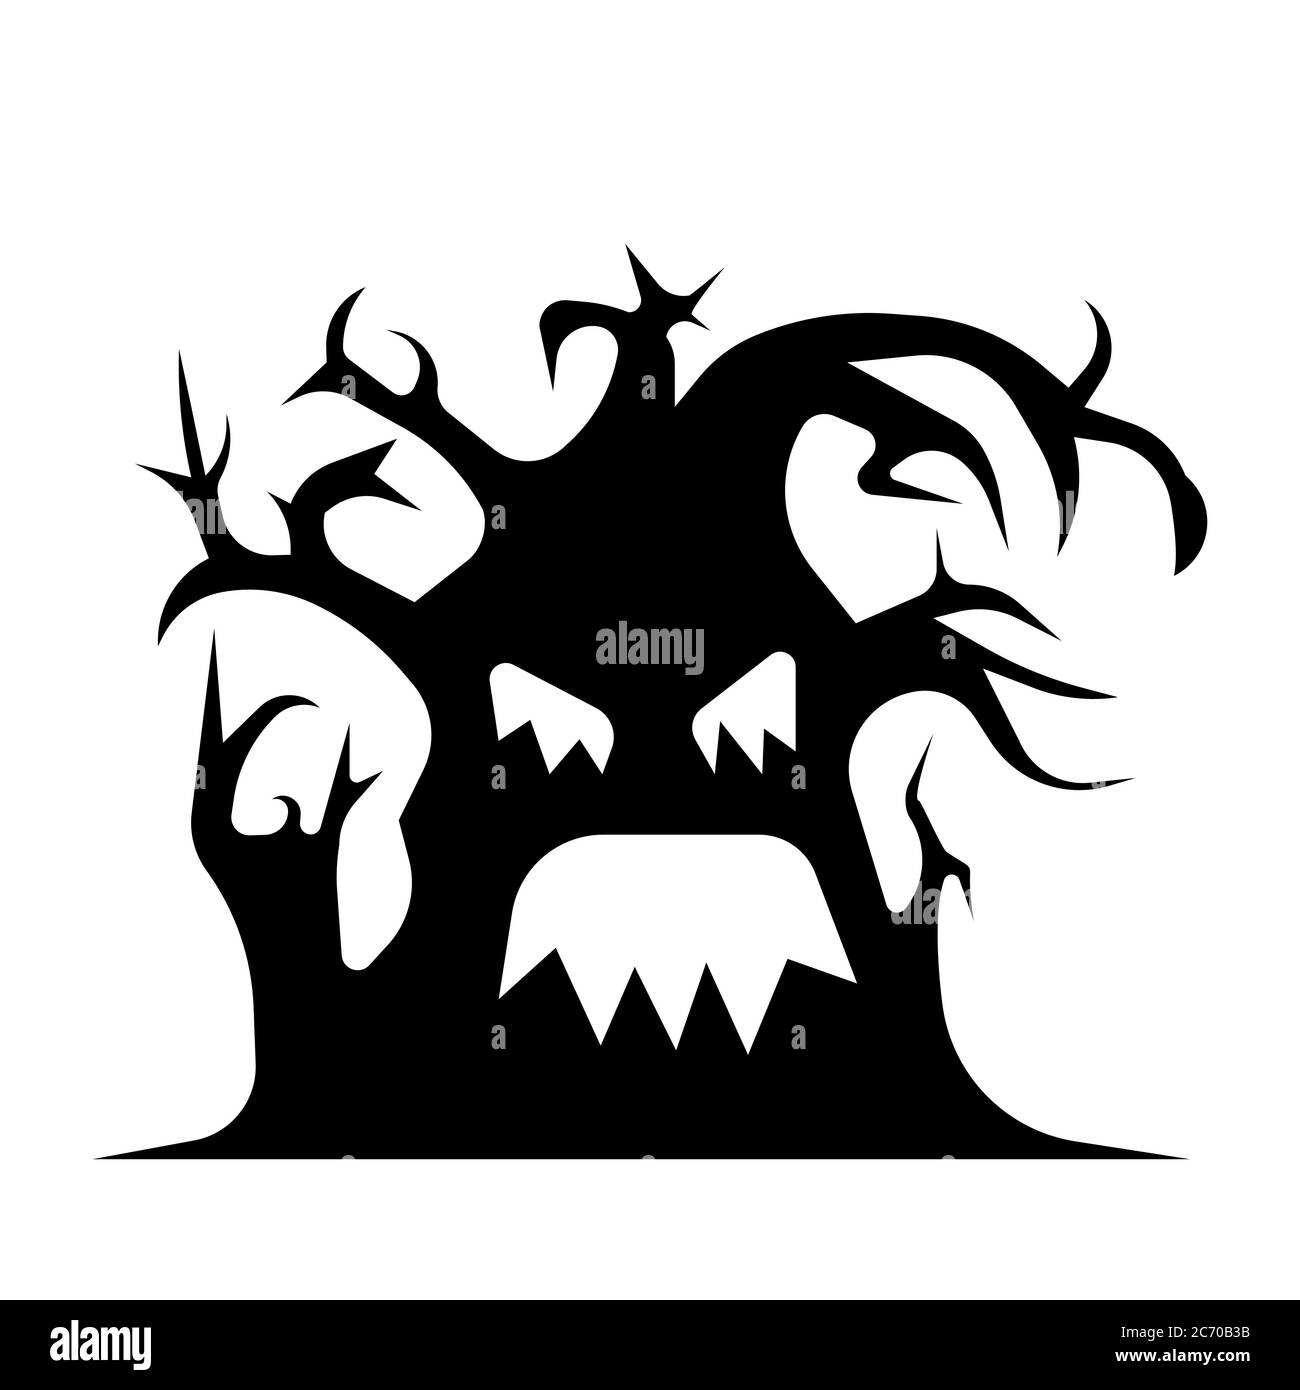 Halloween Spooky Black And White Tree Silhouette Vector Illustration Stock Vector Image Art Alamy